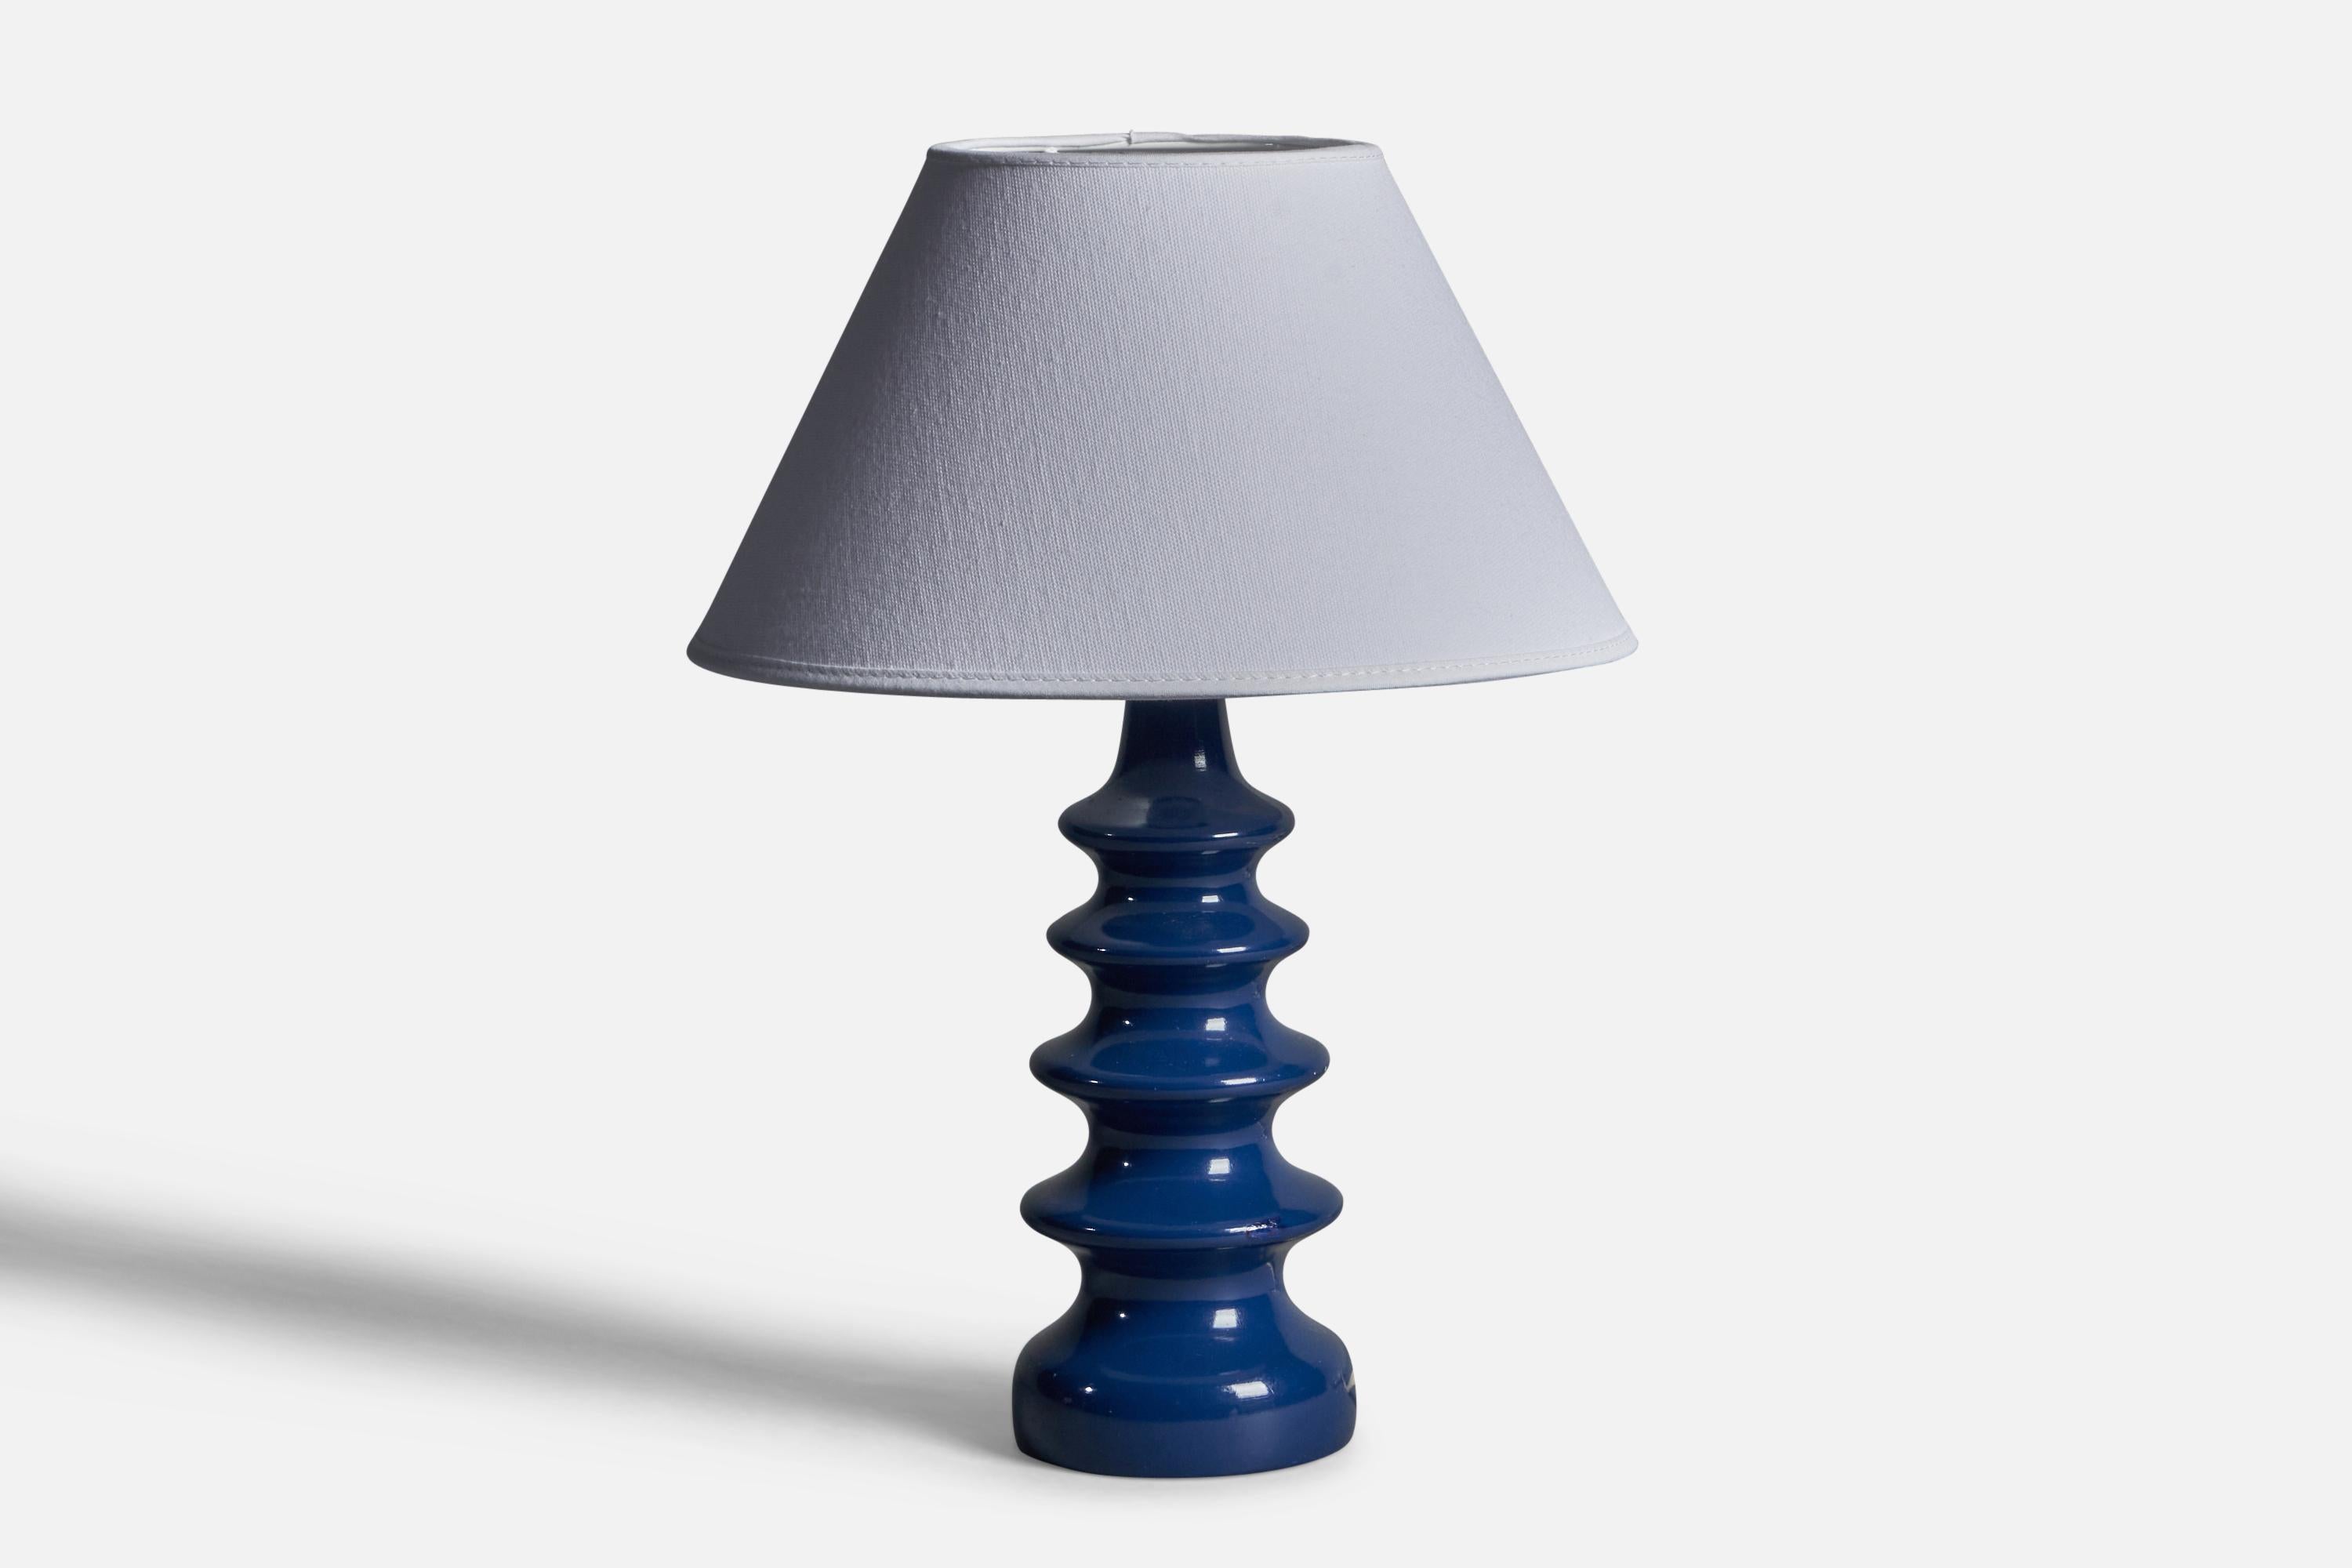 A blue-painted wood table lamp designed and produced in Sweden, 1960s.

Dimensions of Lamp (inches): 10.75